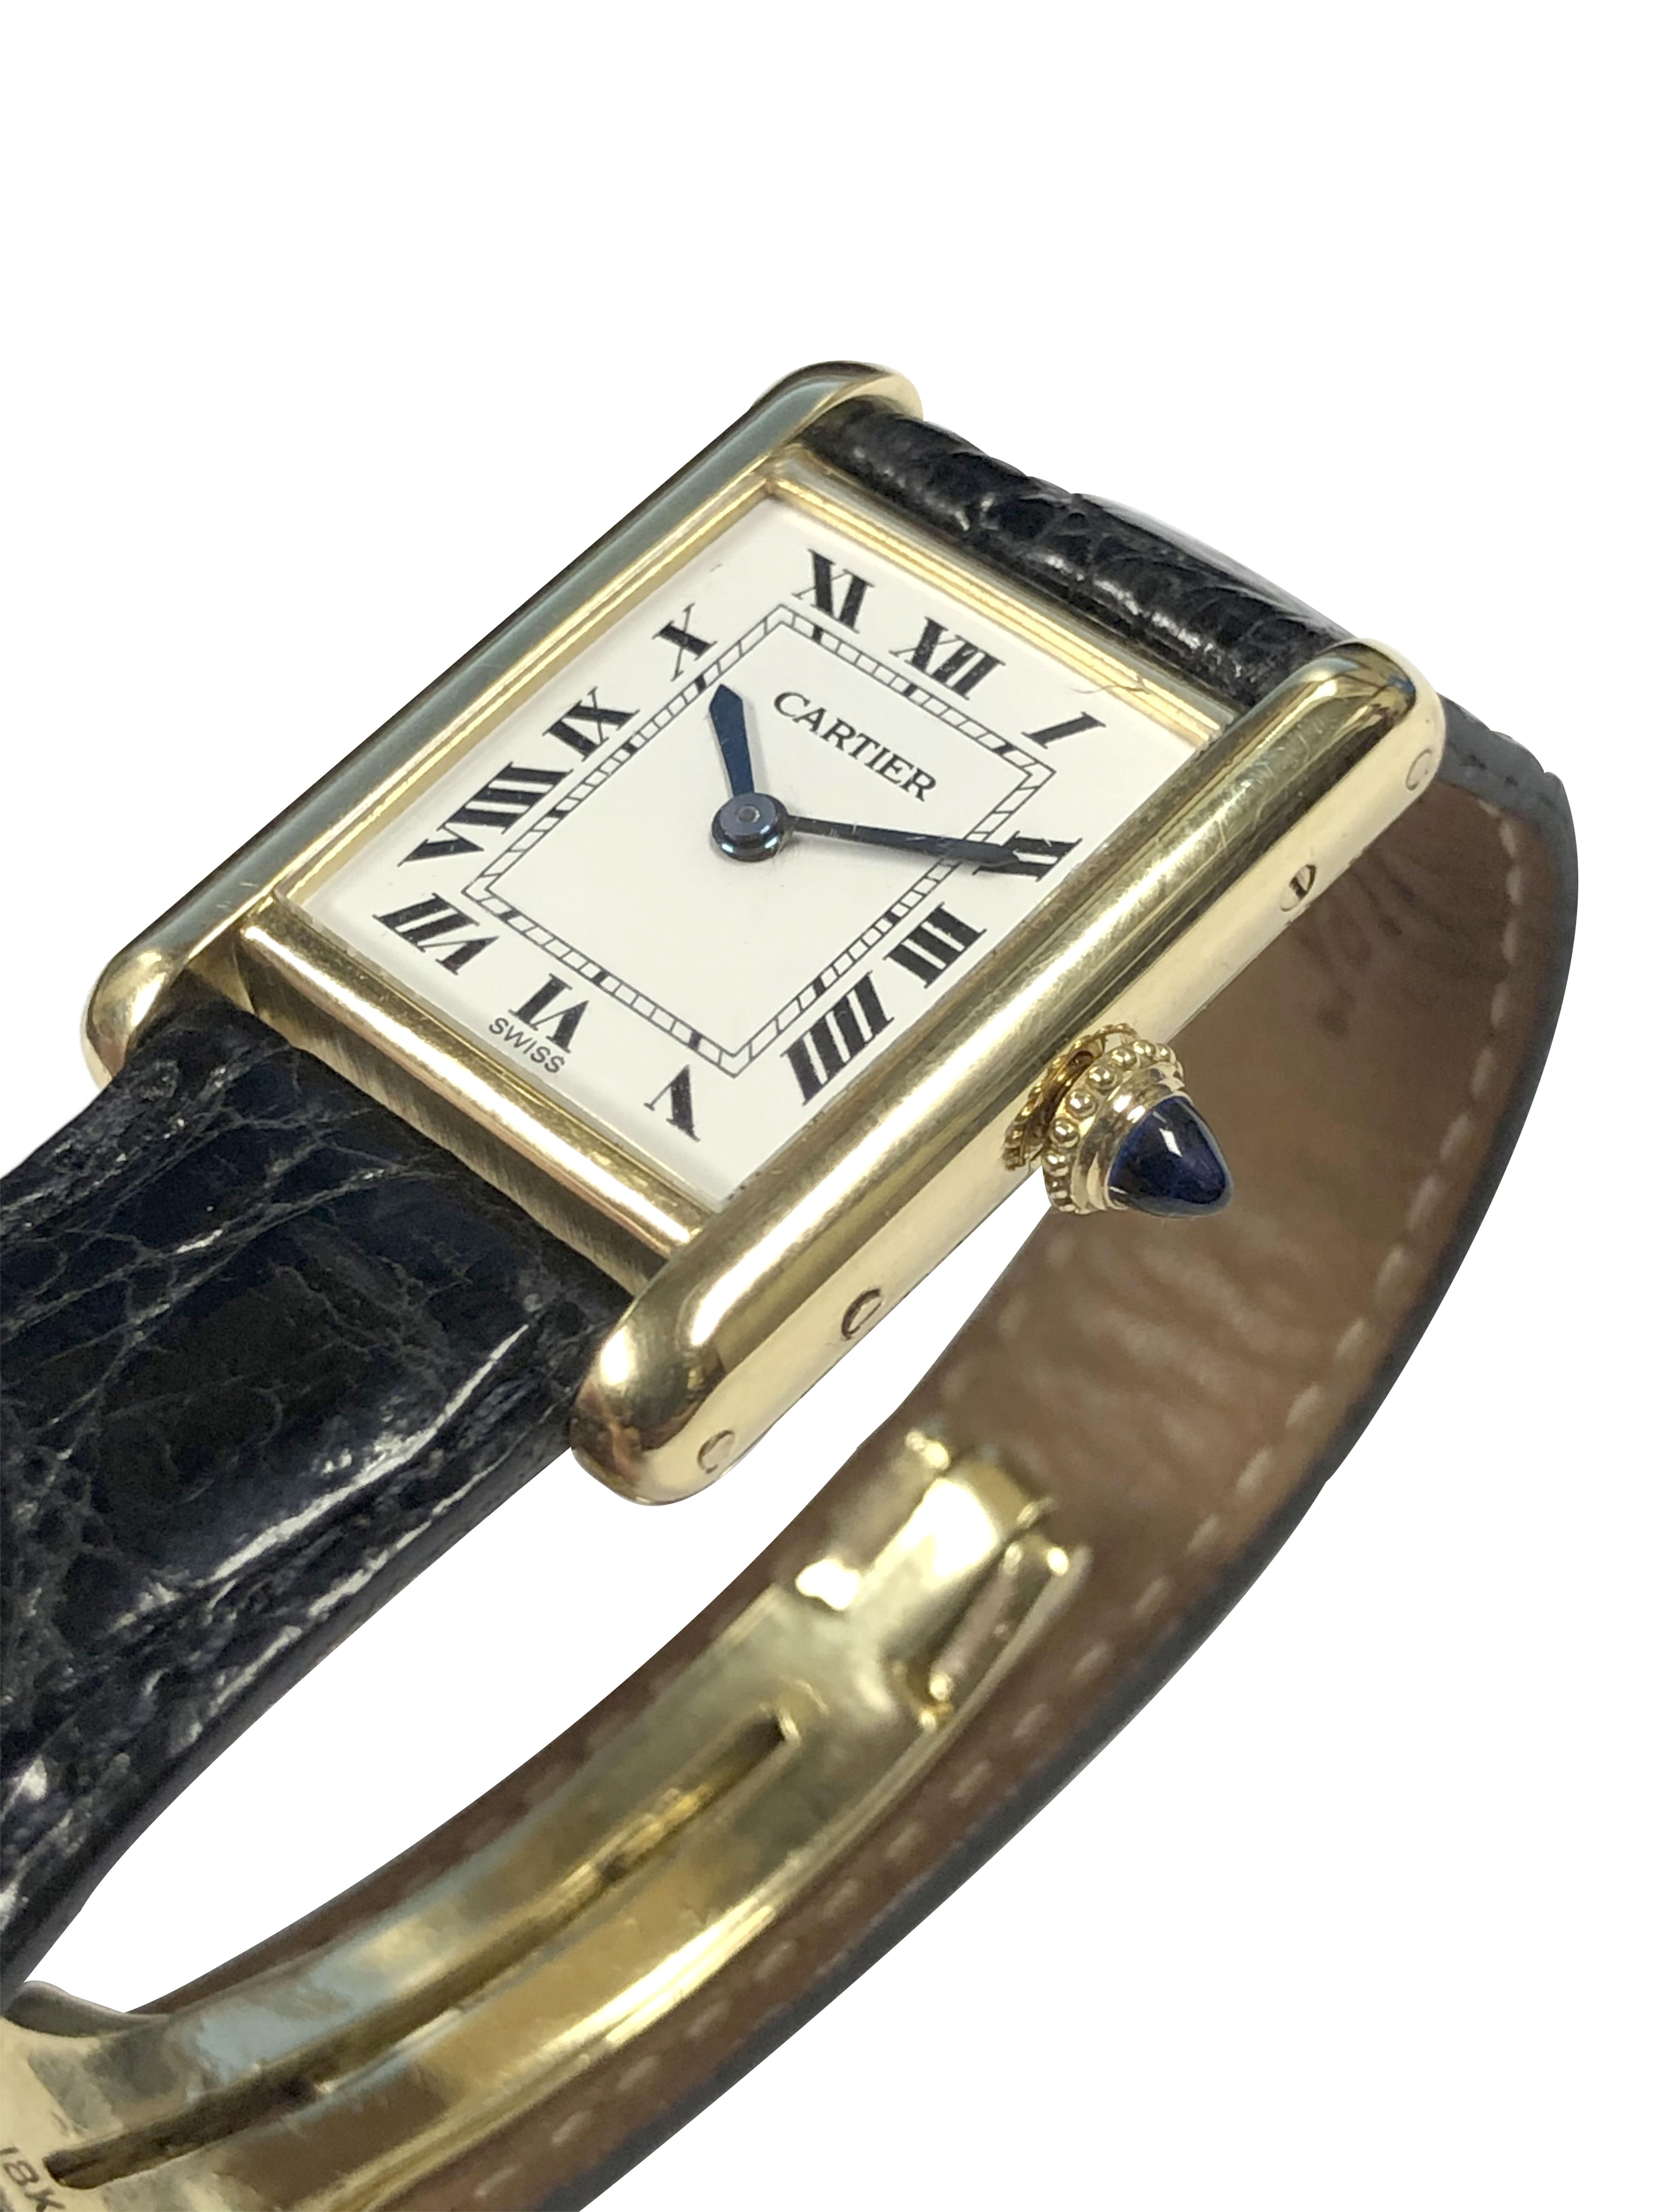 Circa 1970s Classic Tank Wrist Watch for Cartier by Bueche Girod, 27 X 20 M.M. 18K Yellow Gold 2 Piece case, 17 Jewel Bueche Girod Nickle Lever mechanical, manual wind movement, Sapphire Crown, White Dial with Black Roman Numerals. Black Croco